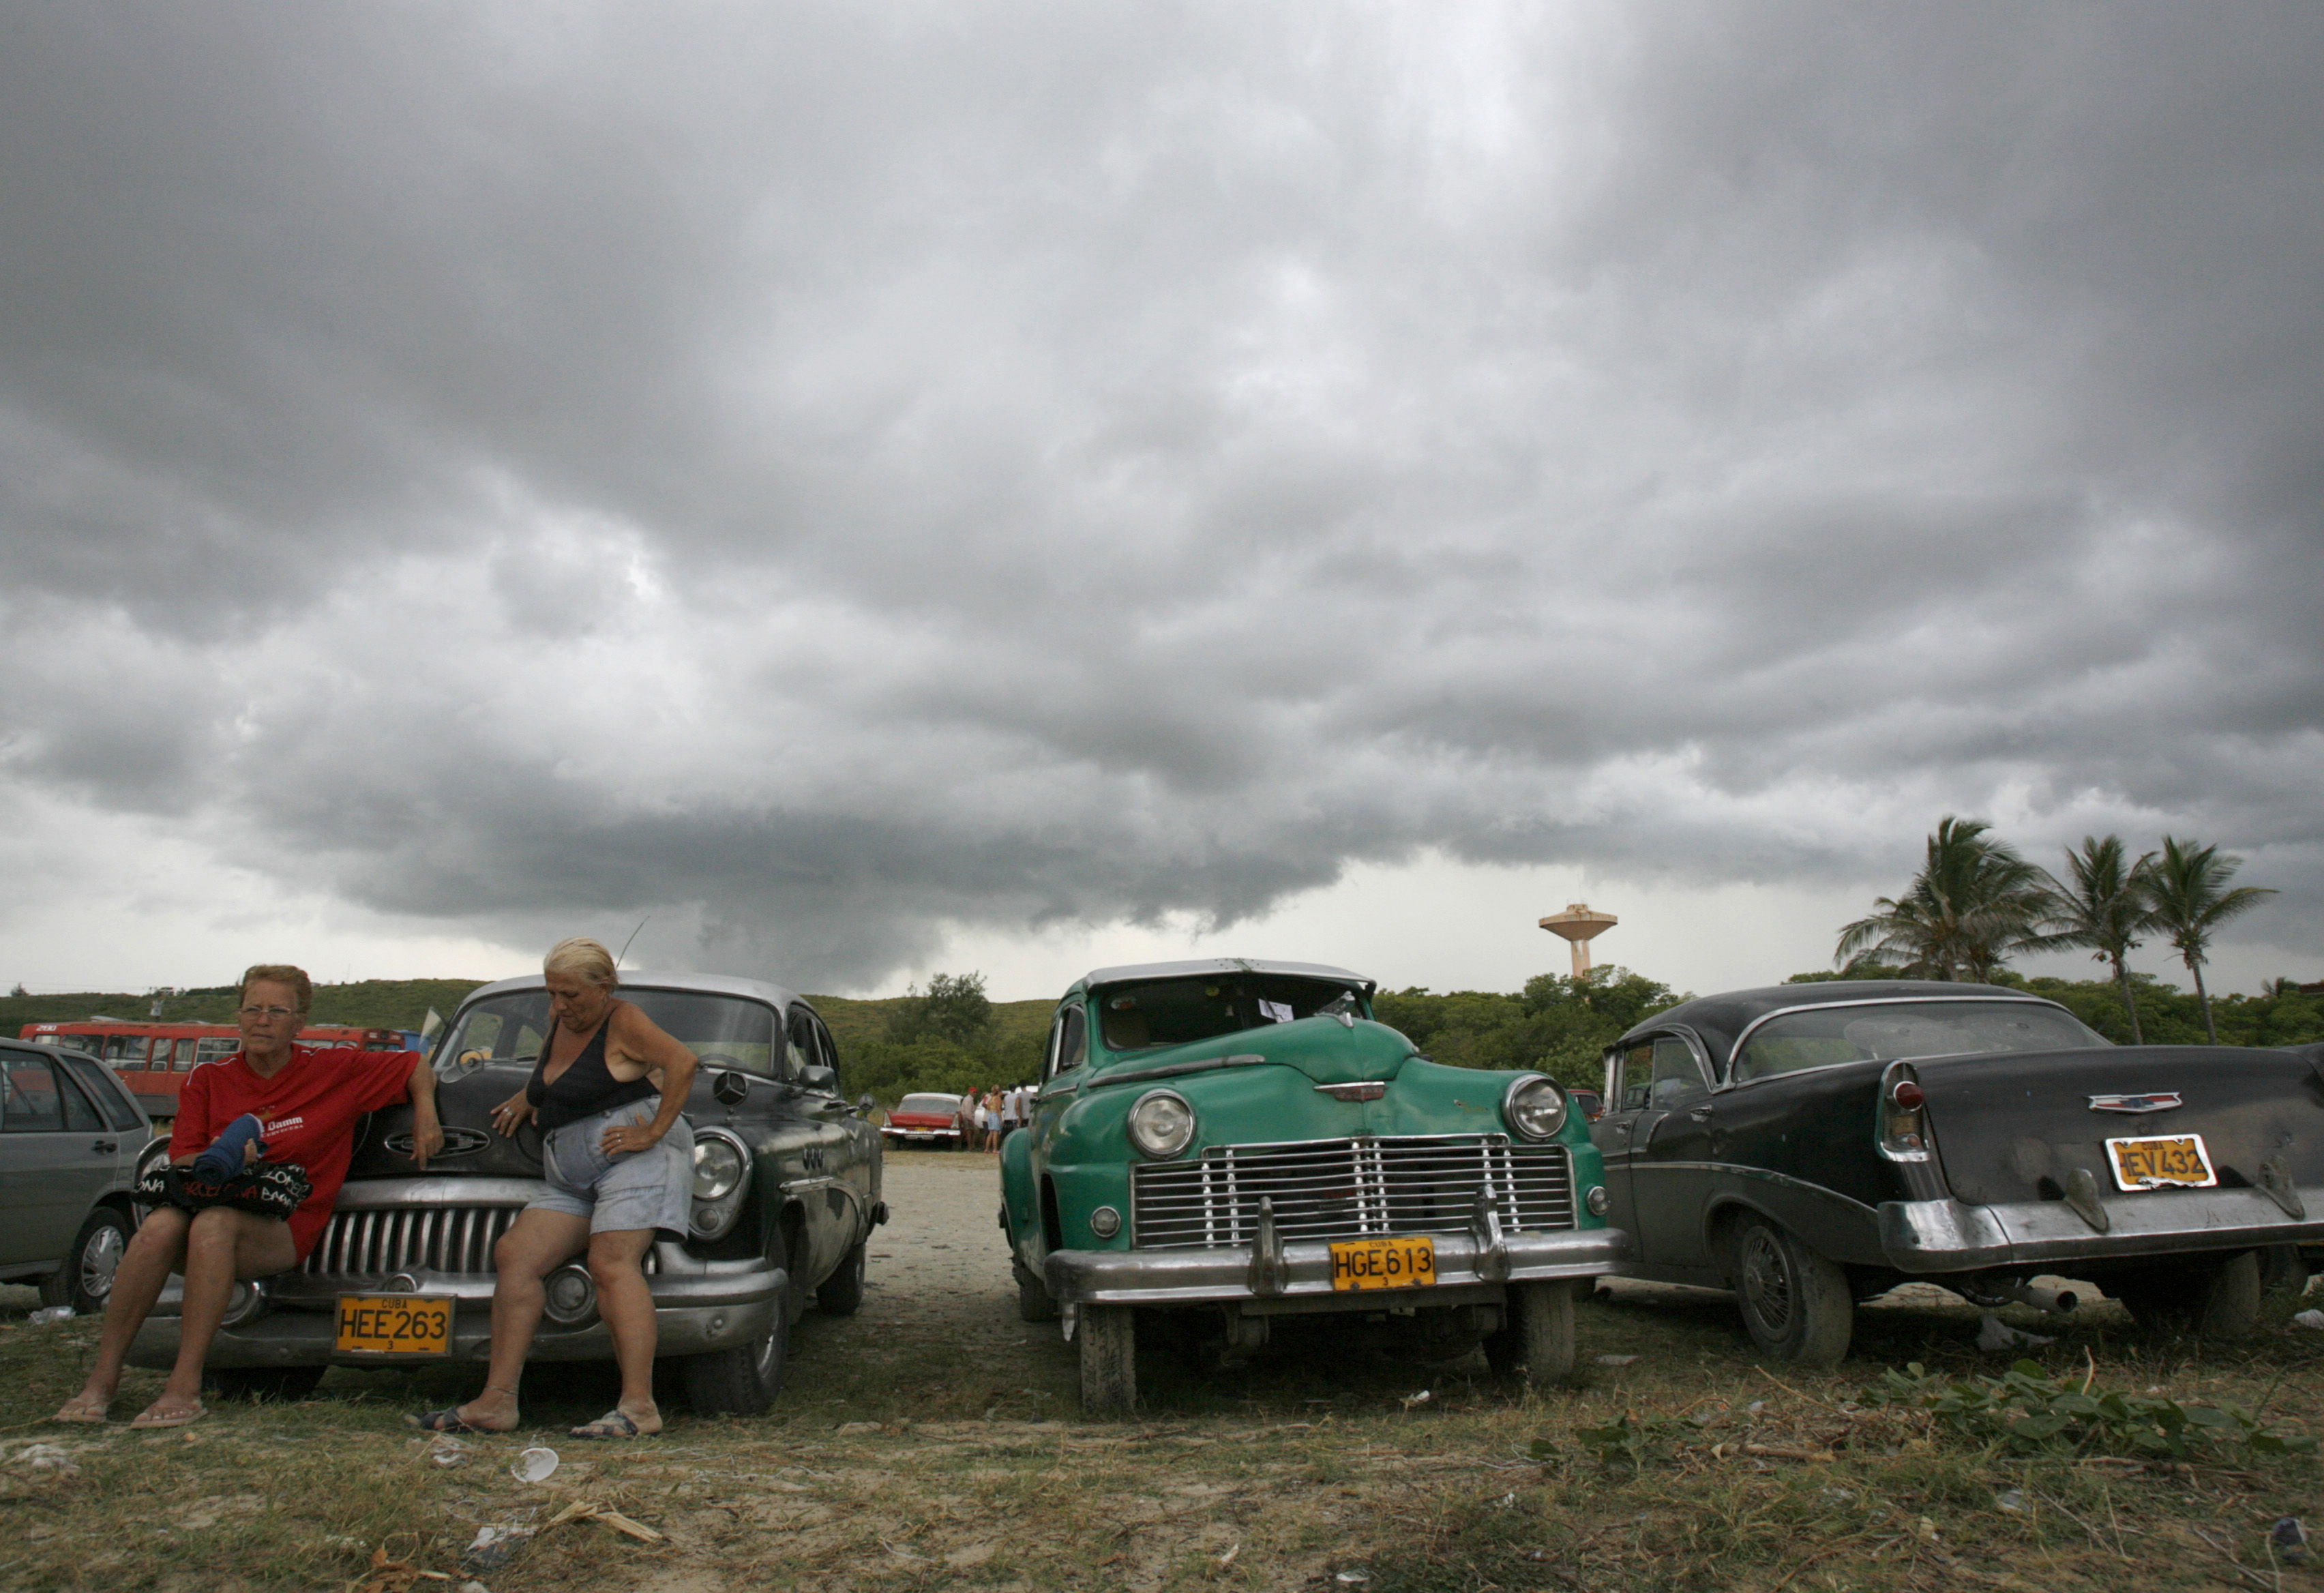 Women rest while sitting on a vintage car in a parking lot at the beach in Guanabo